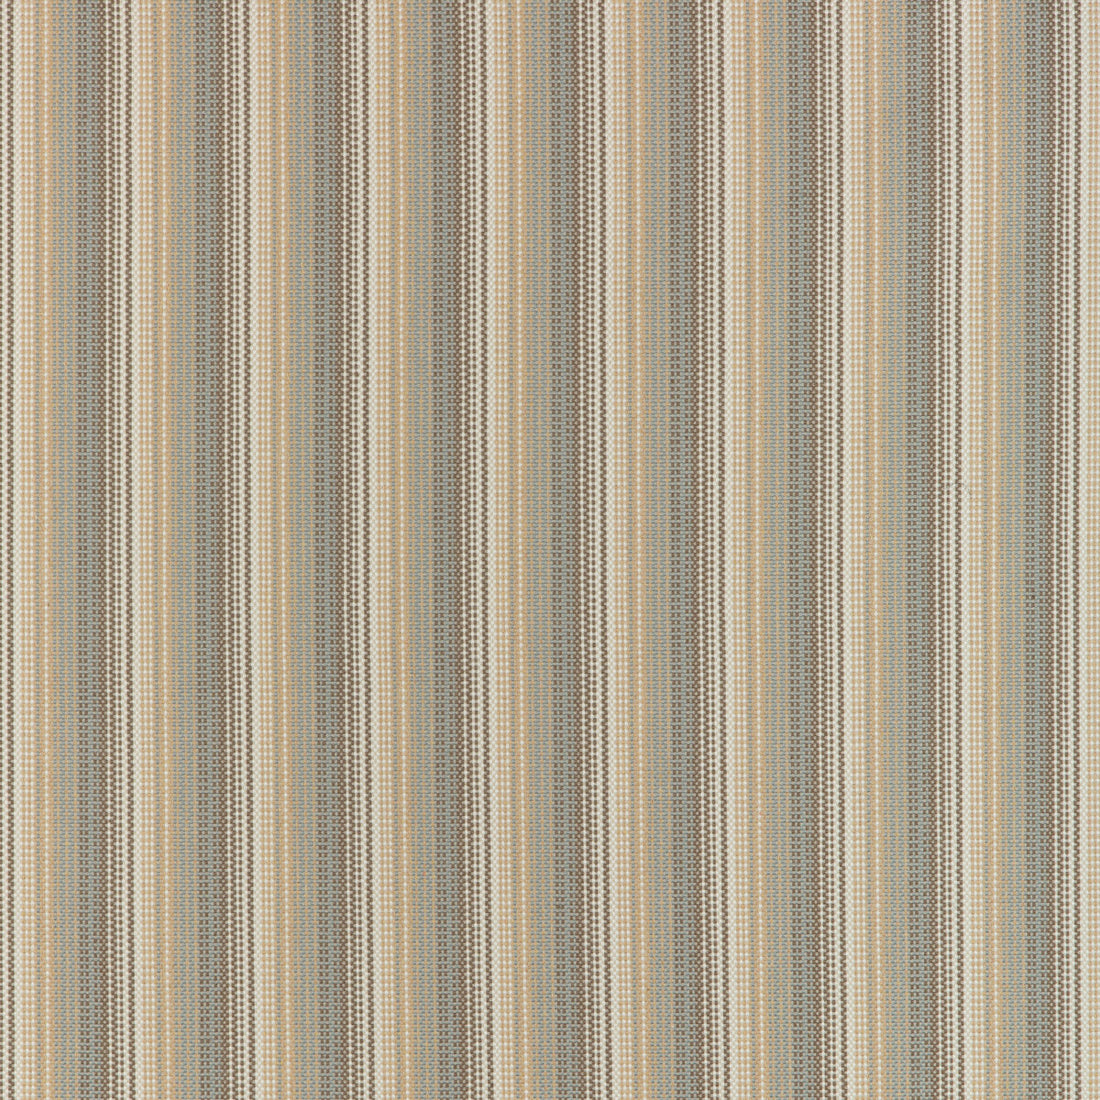 Baystreet fabric in driftwood color - pattern 37068.166.0 - by Kravet Contract in the Chesapeake collection